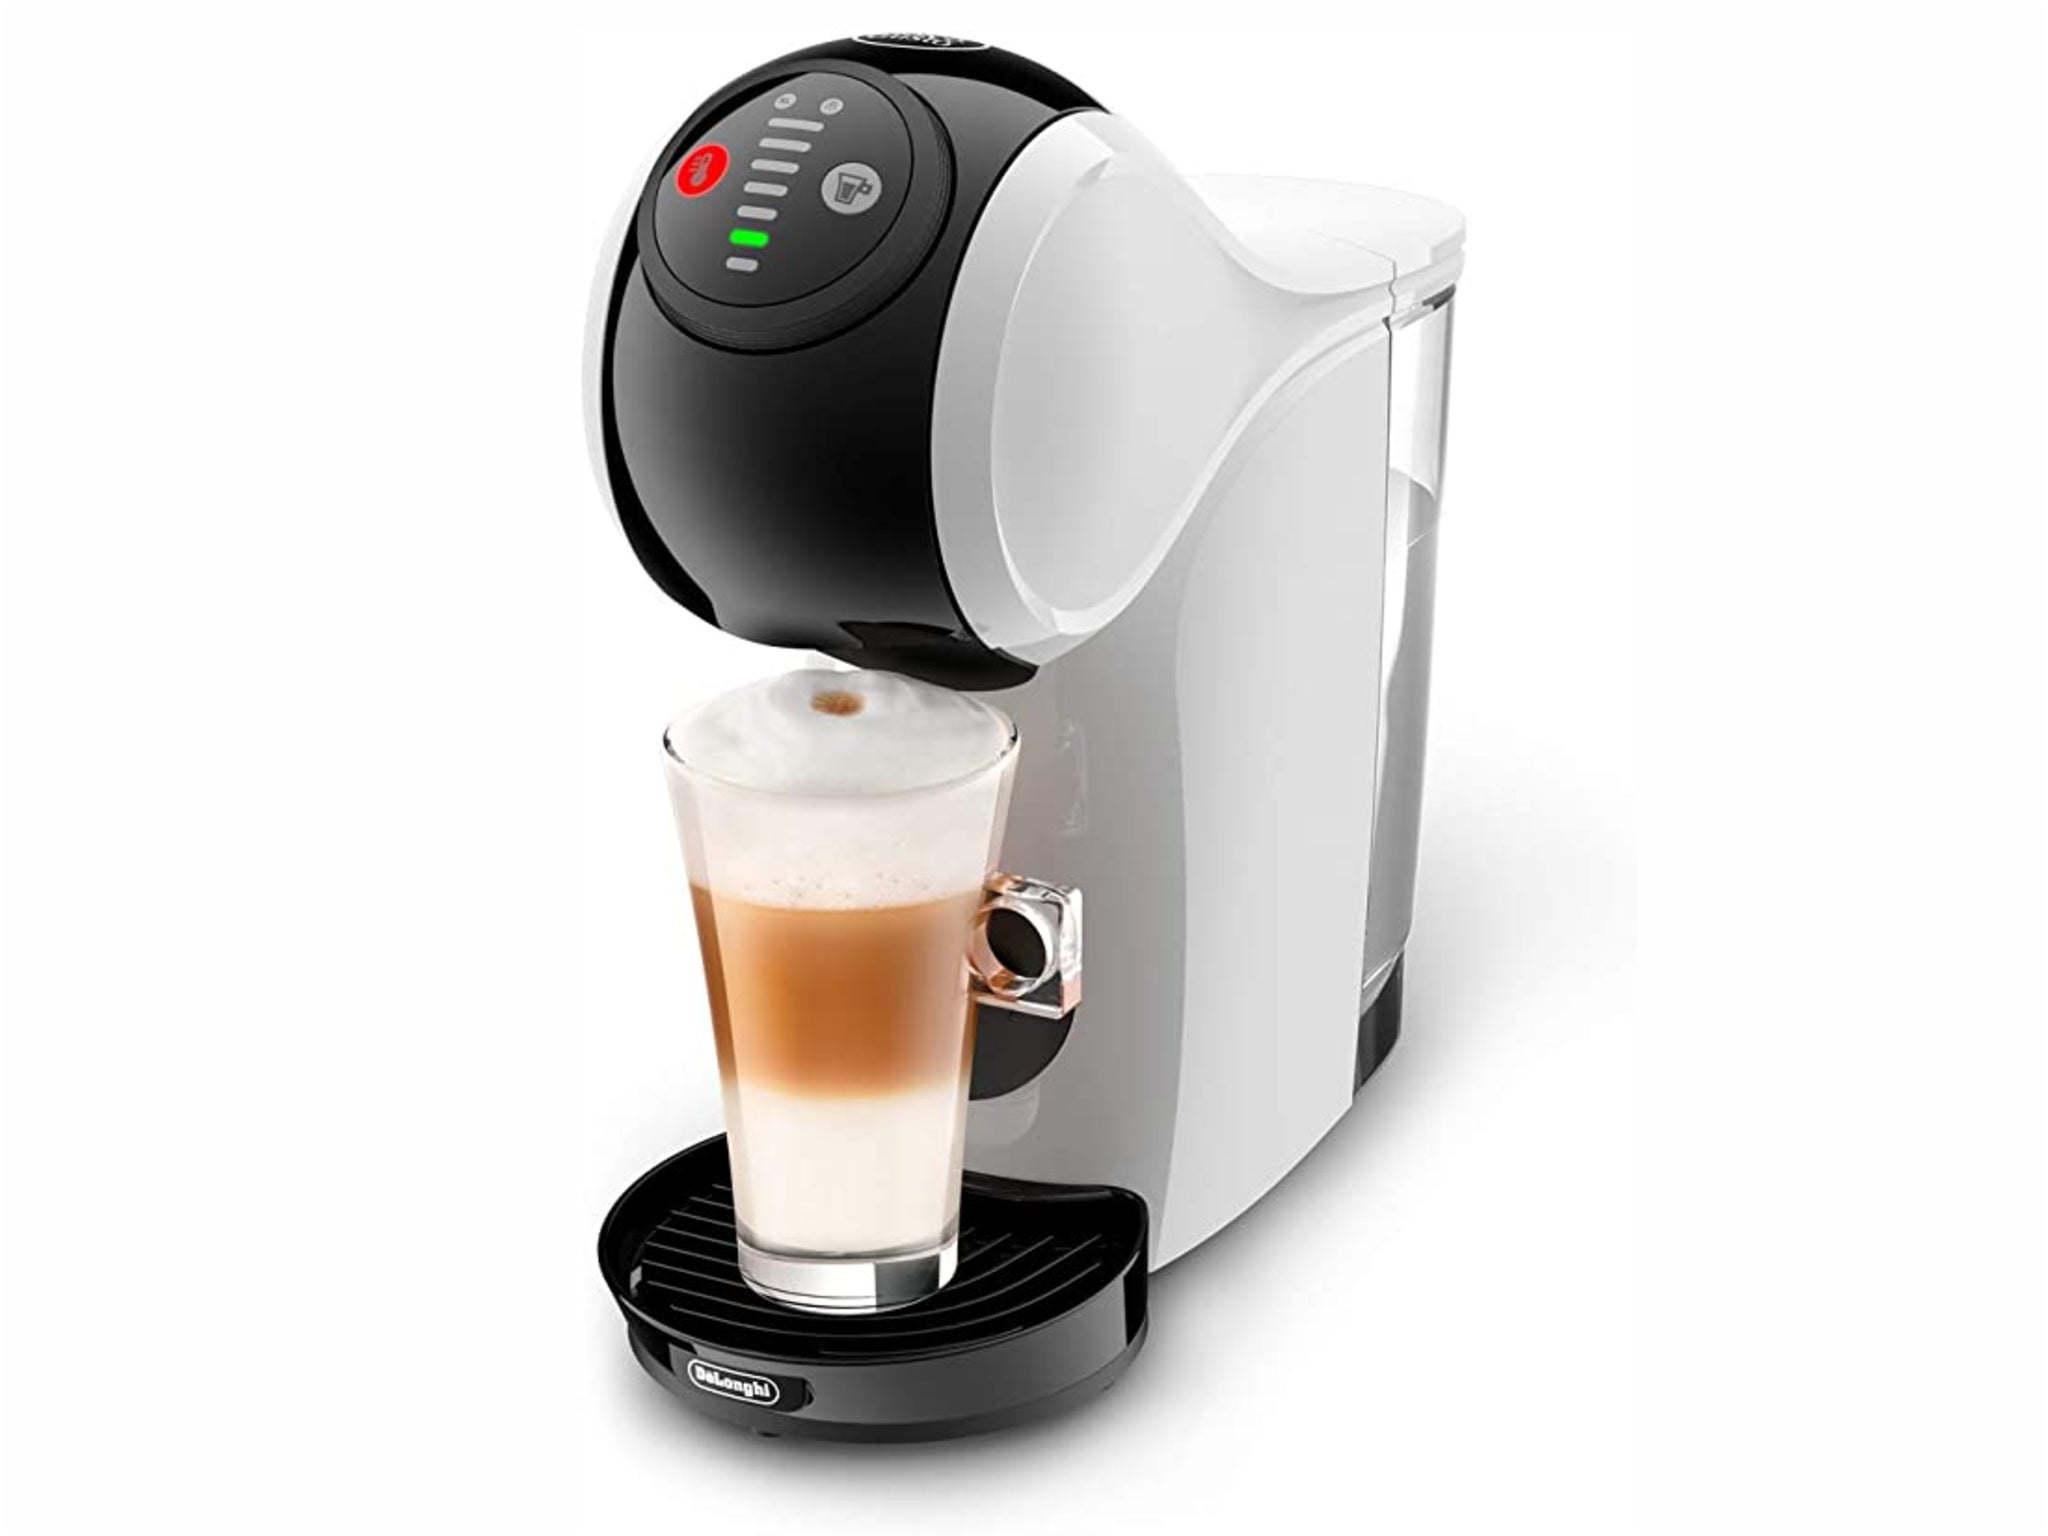 delonghi dulce gusto review indybest.jpg